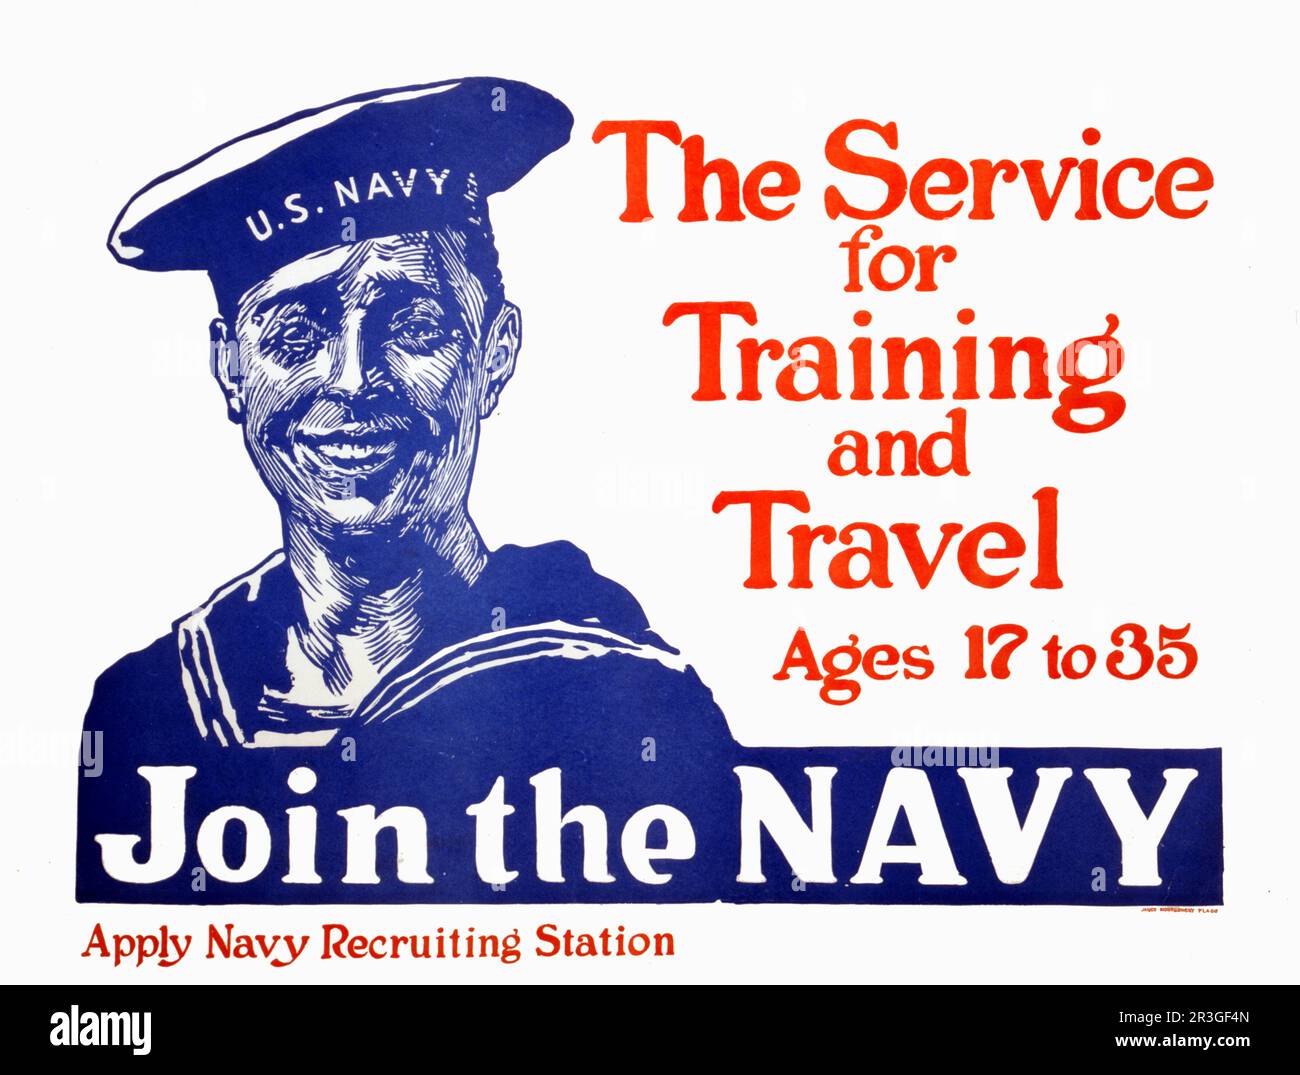 Vintage U.S. Navy recruiting poster showing a smiling sailor. Stock Photo